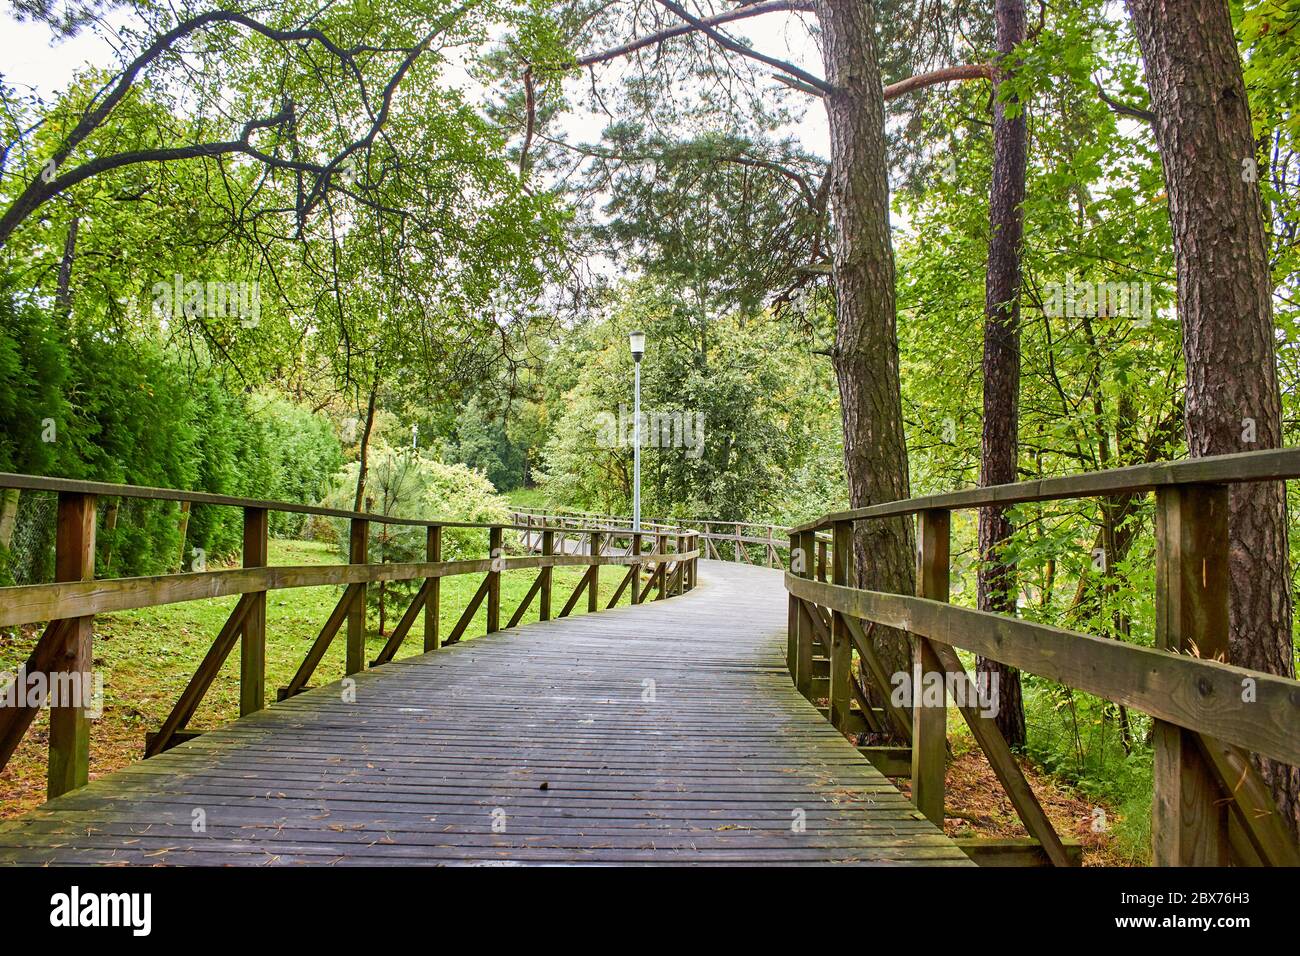 Wooden foot bridge in the forest Stock Photo